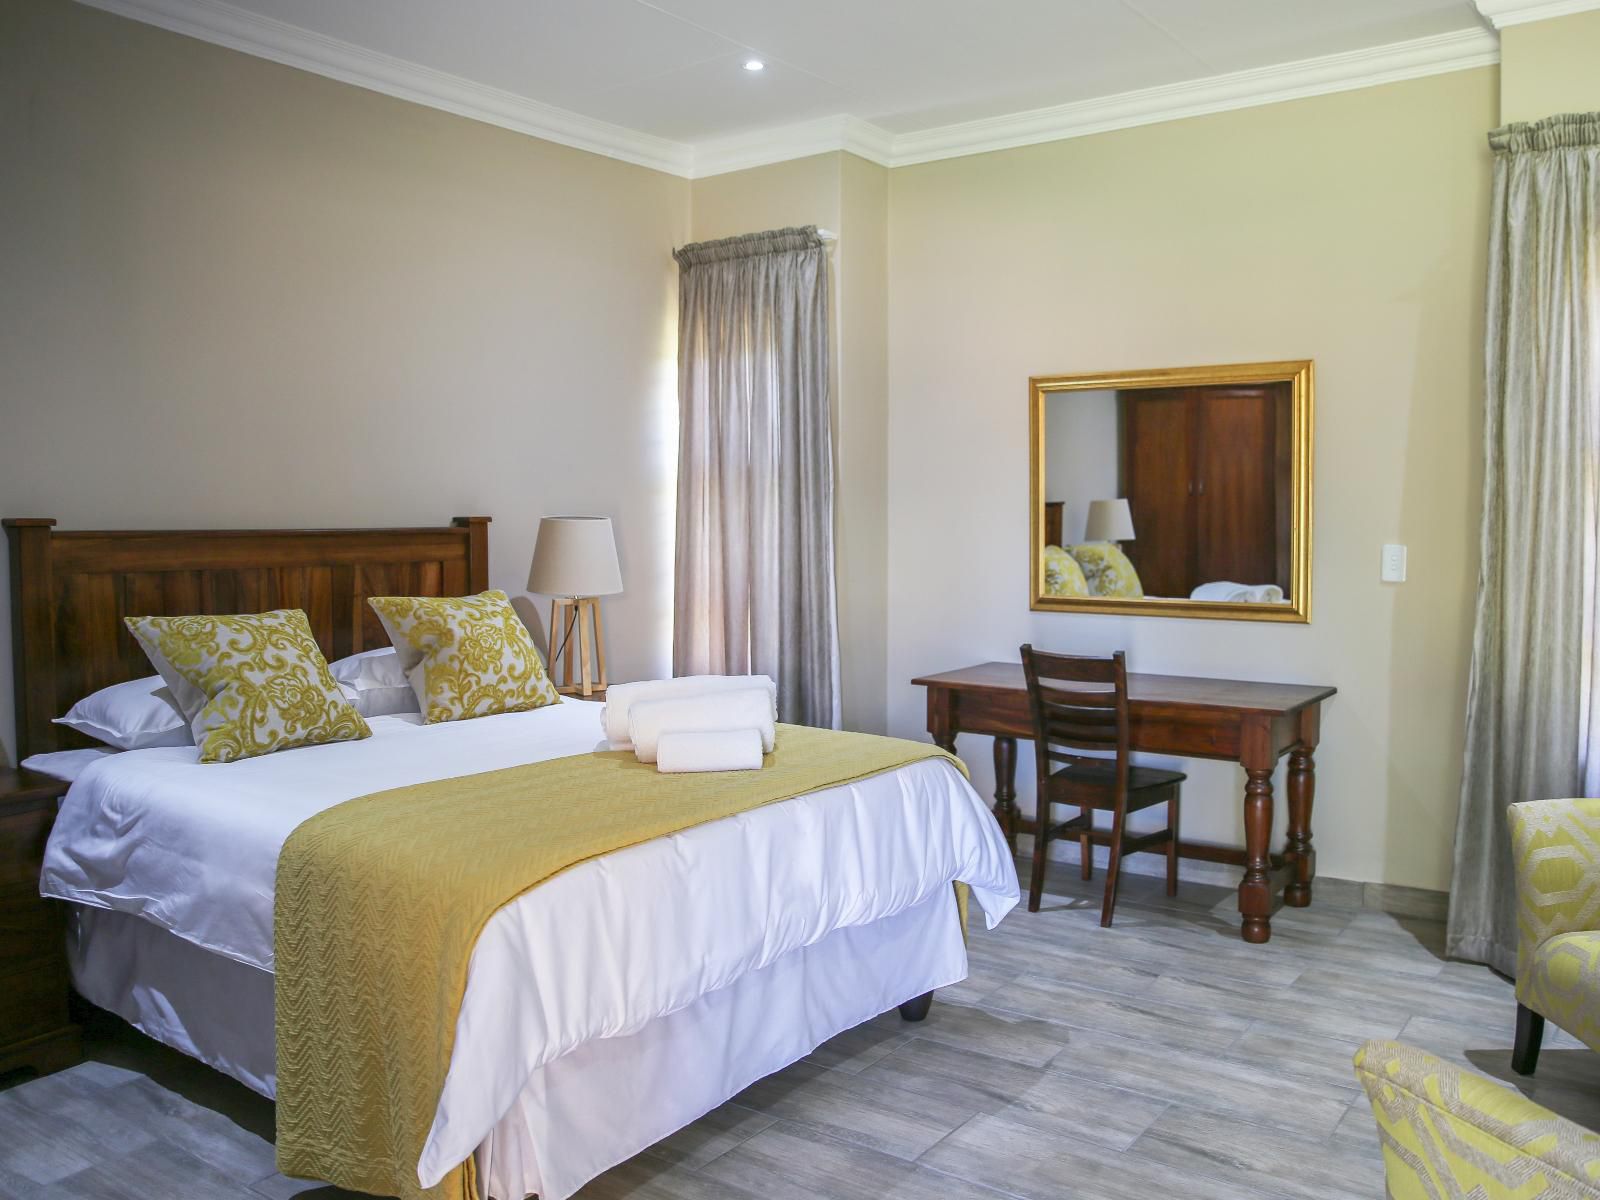 2 Owls Guesthouse Mooivallei Park Potchefstroom North West Province South Africa Bedroom